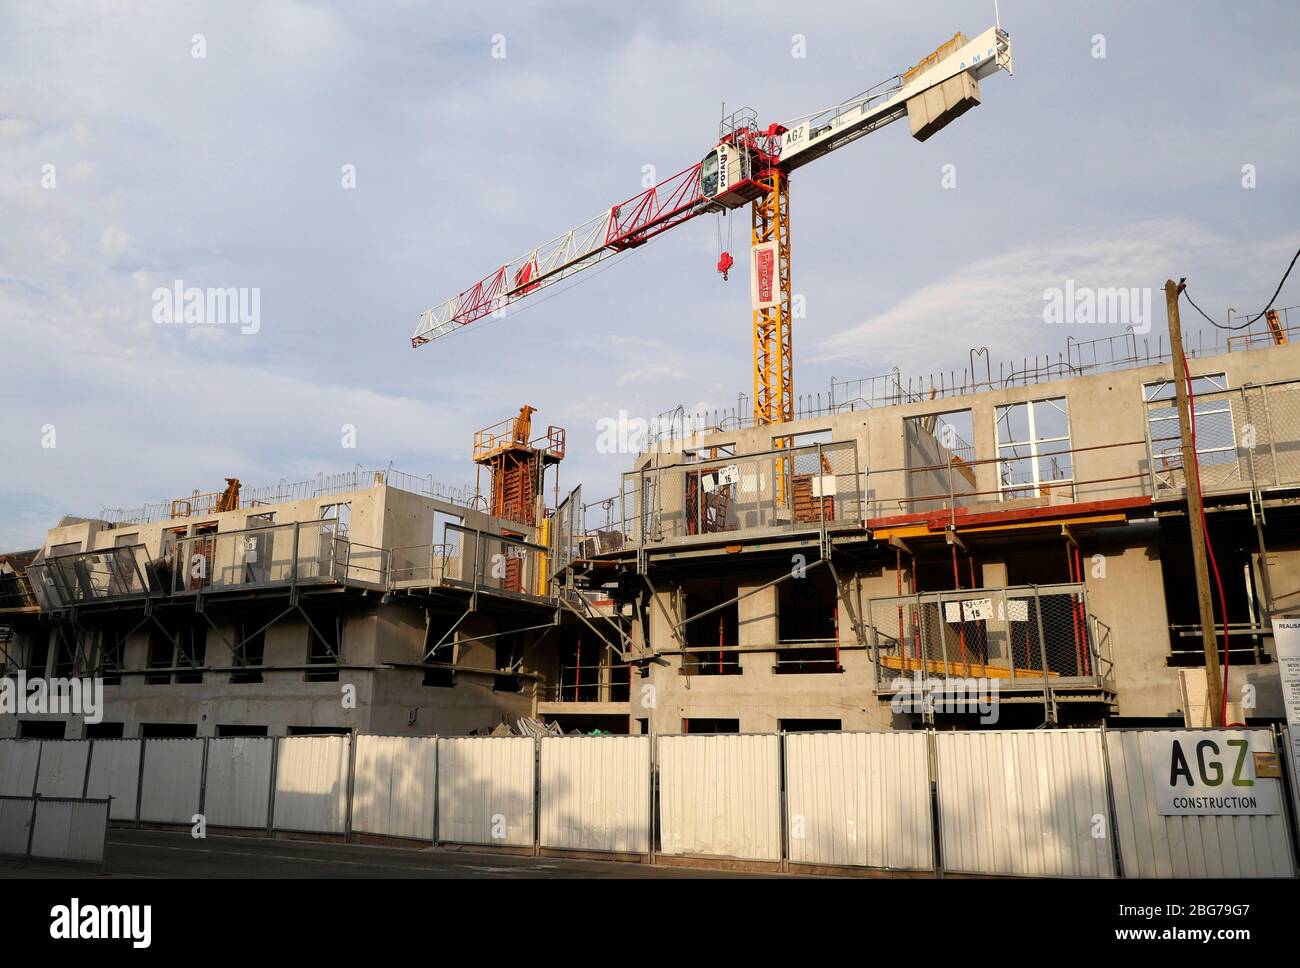 AJAXNETPHOTO. 2018. BOUGIVAL, FRANCE. - NEW APARTMENTS - UNDER CONSTRUCTION IN THE TOWN.PHOTO:JONATHAN EASTLAND/AJAX REF:GX8 181909 433 Stock Photo